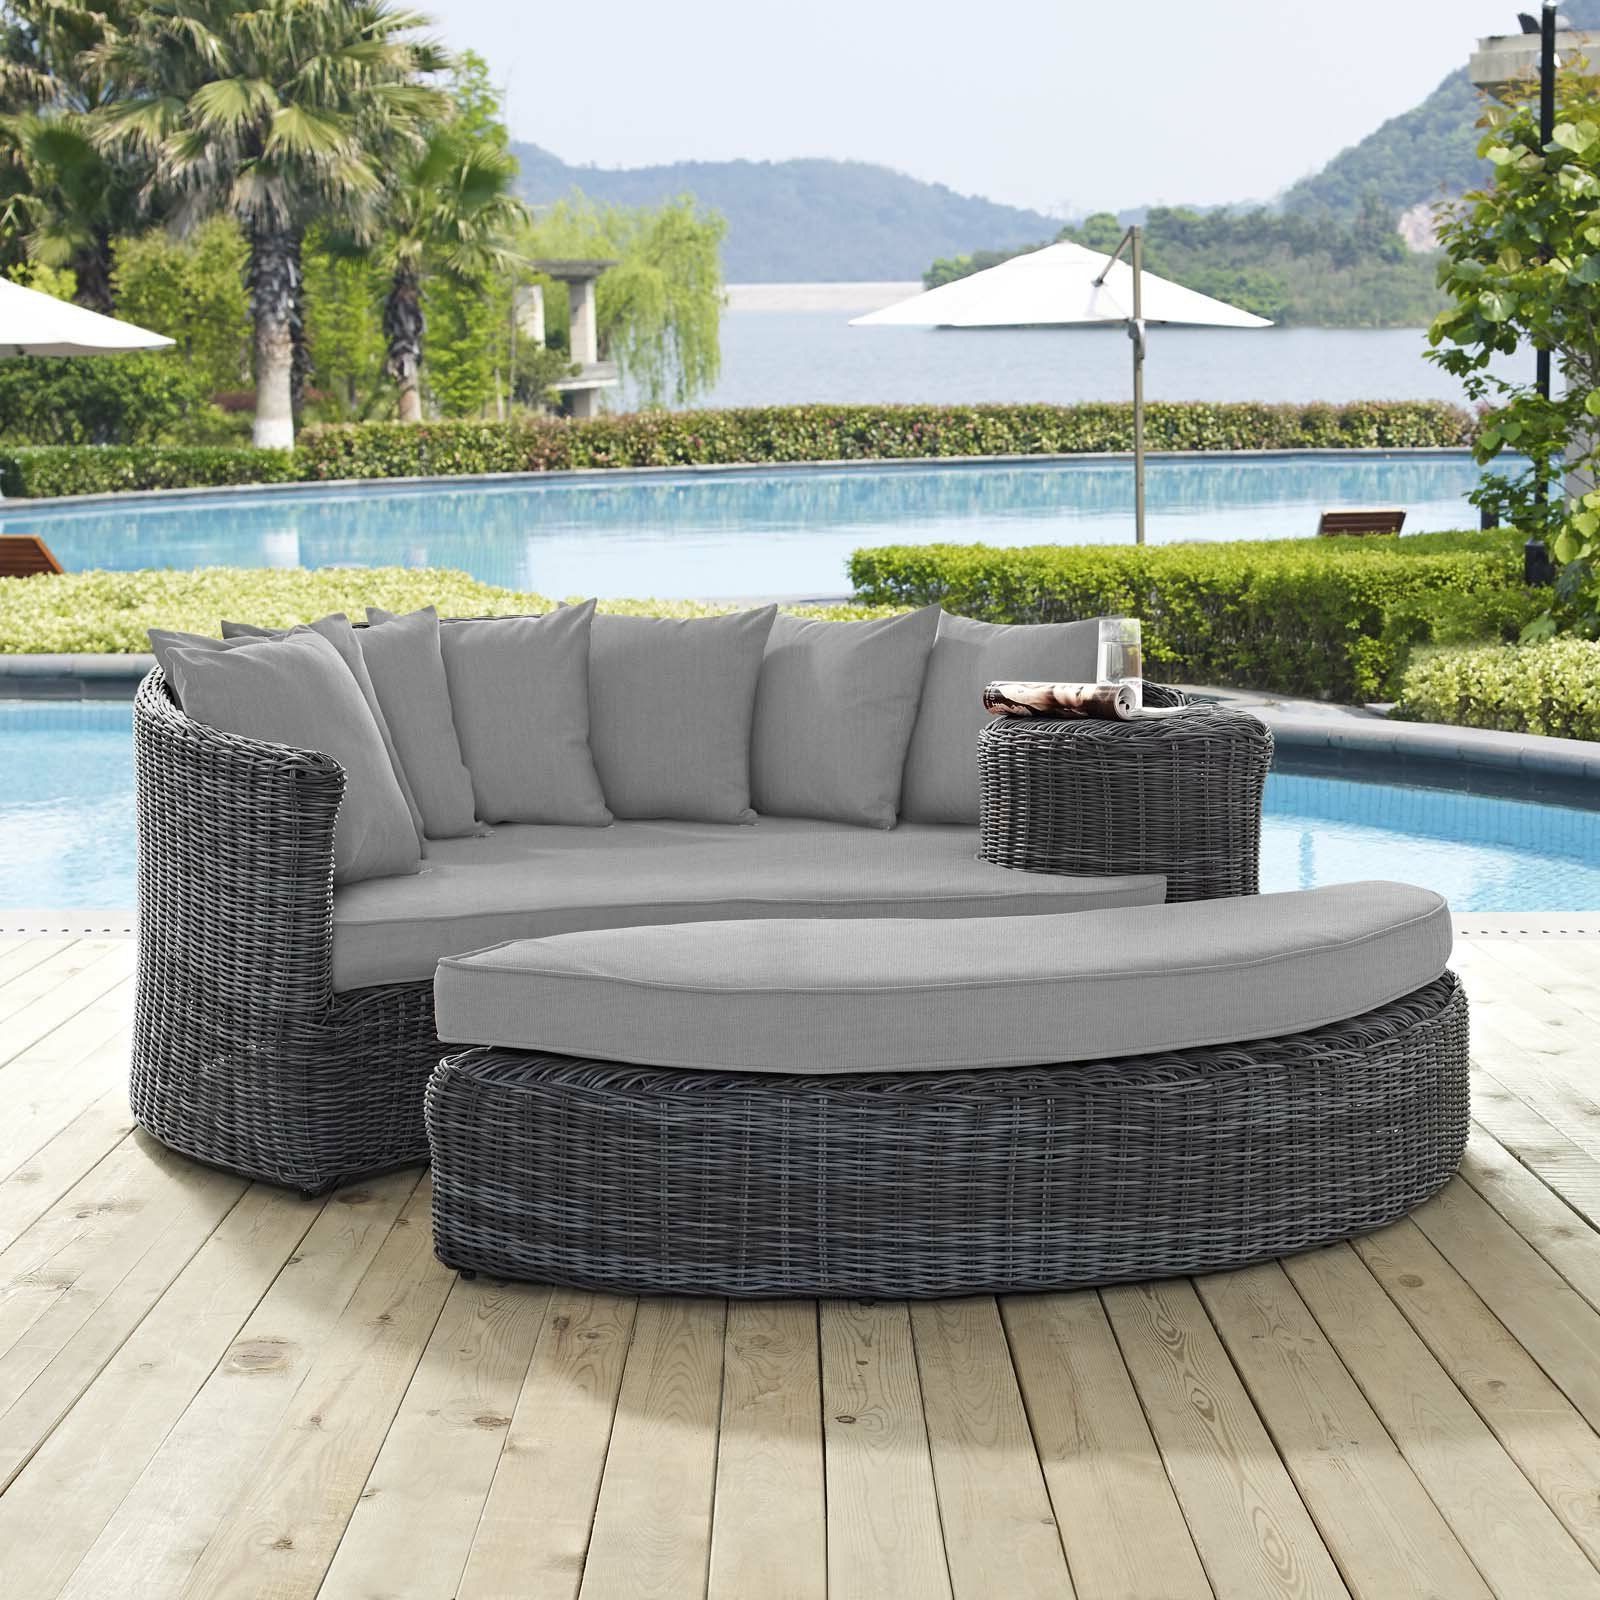 Fashionable Brentwood Patio Daybeds With Cushions Pertaining To Keiran Patio Daybed With Cushions (View 16 of 25)